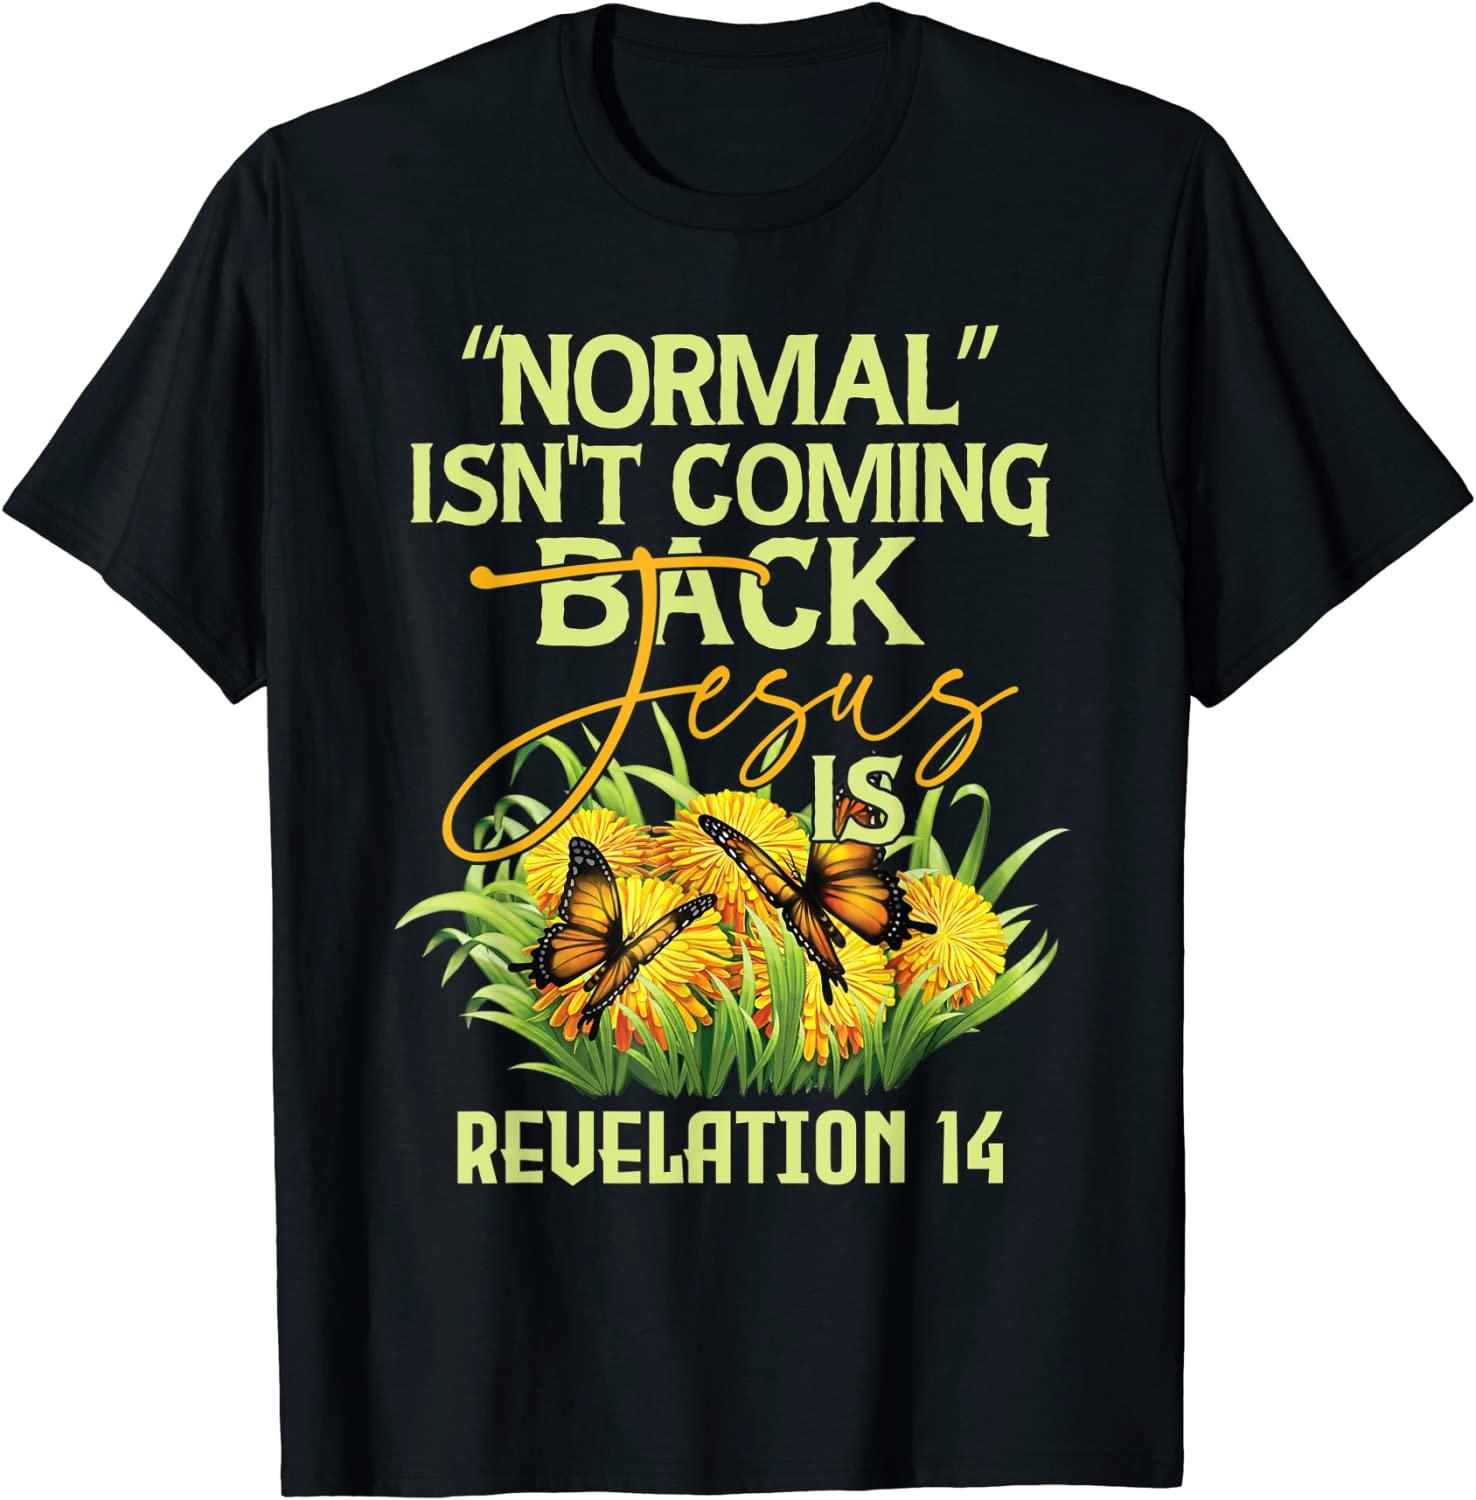 Normal Isn't Coming Back Jesus Is T-Shirt Best Price